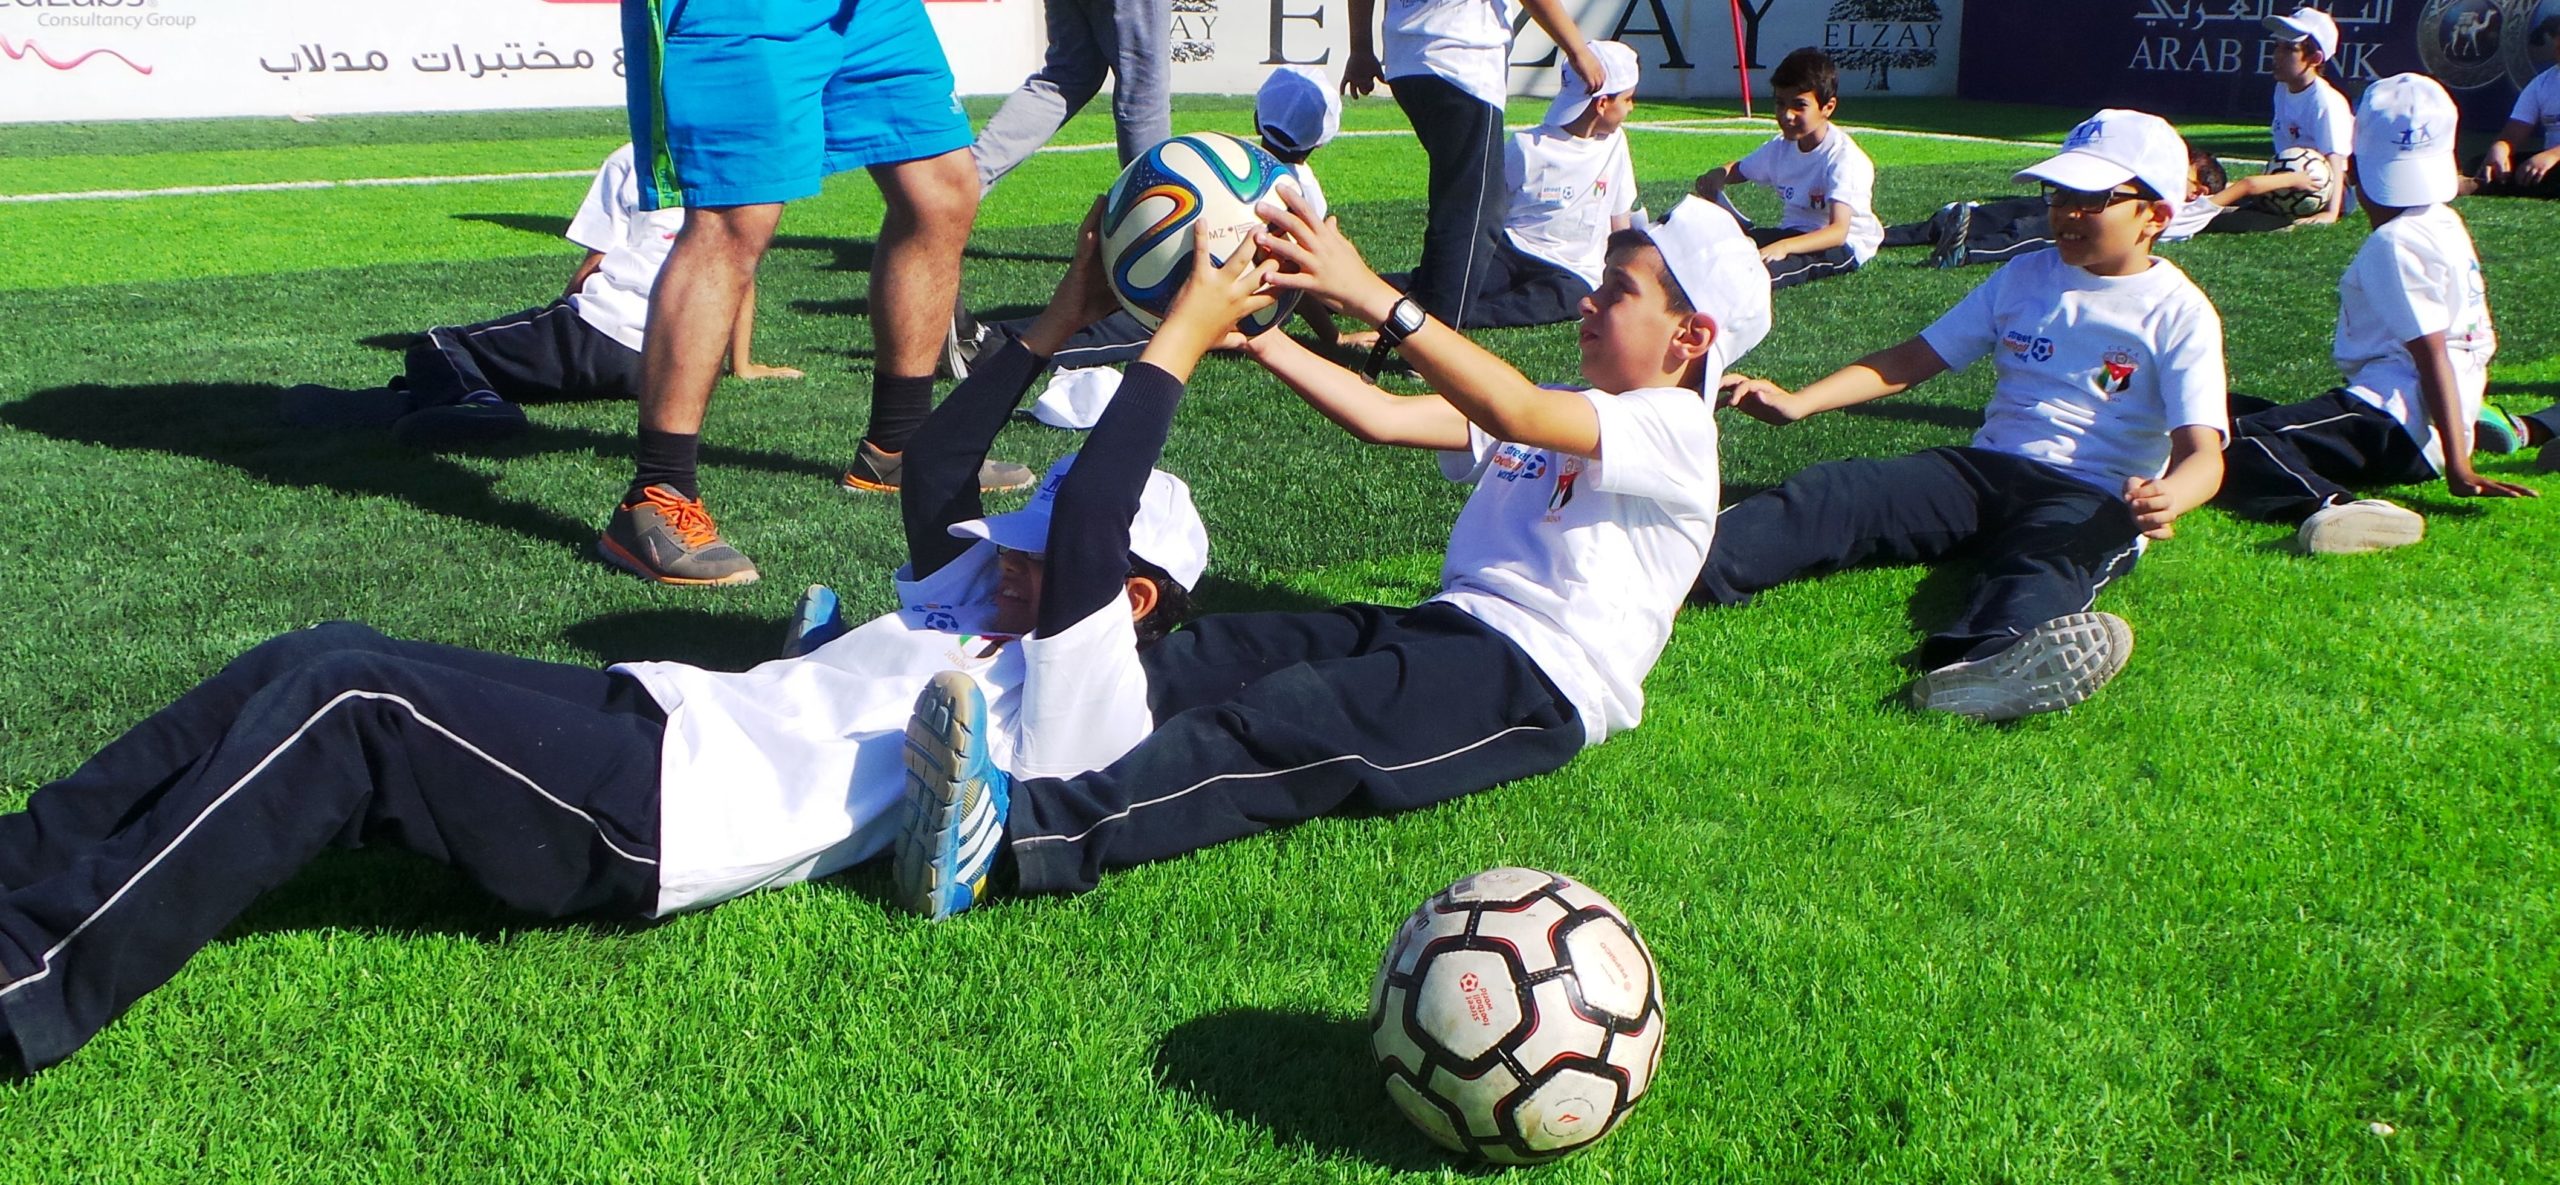 Read more about the article Evaluation of; Playing for a Common Future – Dialogue through Sports in Jordan